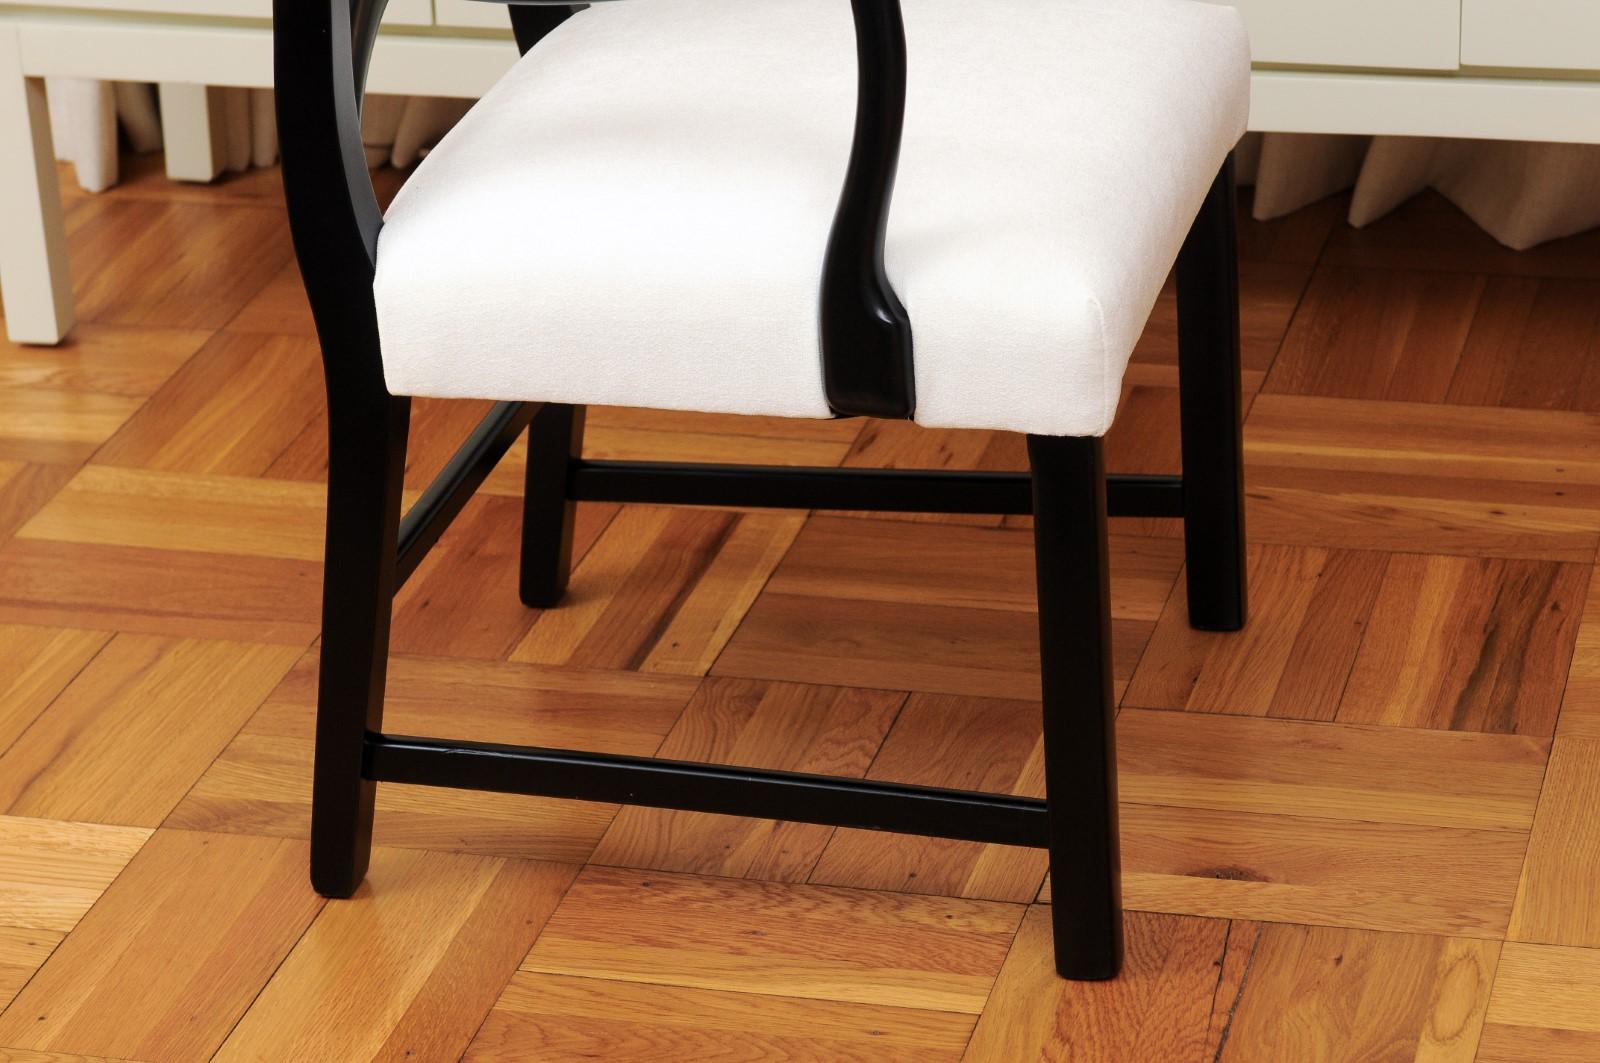 All Arms, Chic Set of 12 Dining Chairs by Michael Taylor for Baker, circa 1960 In Excellent Condition For Sale In Atlanta, GA